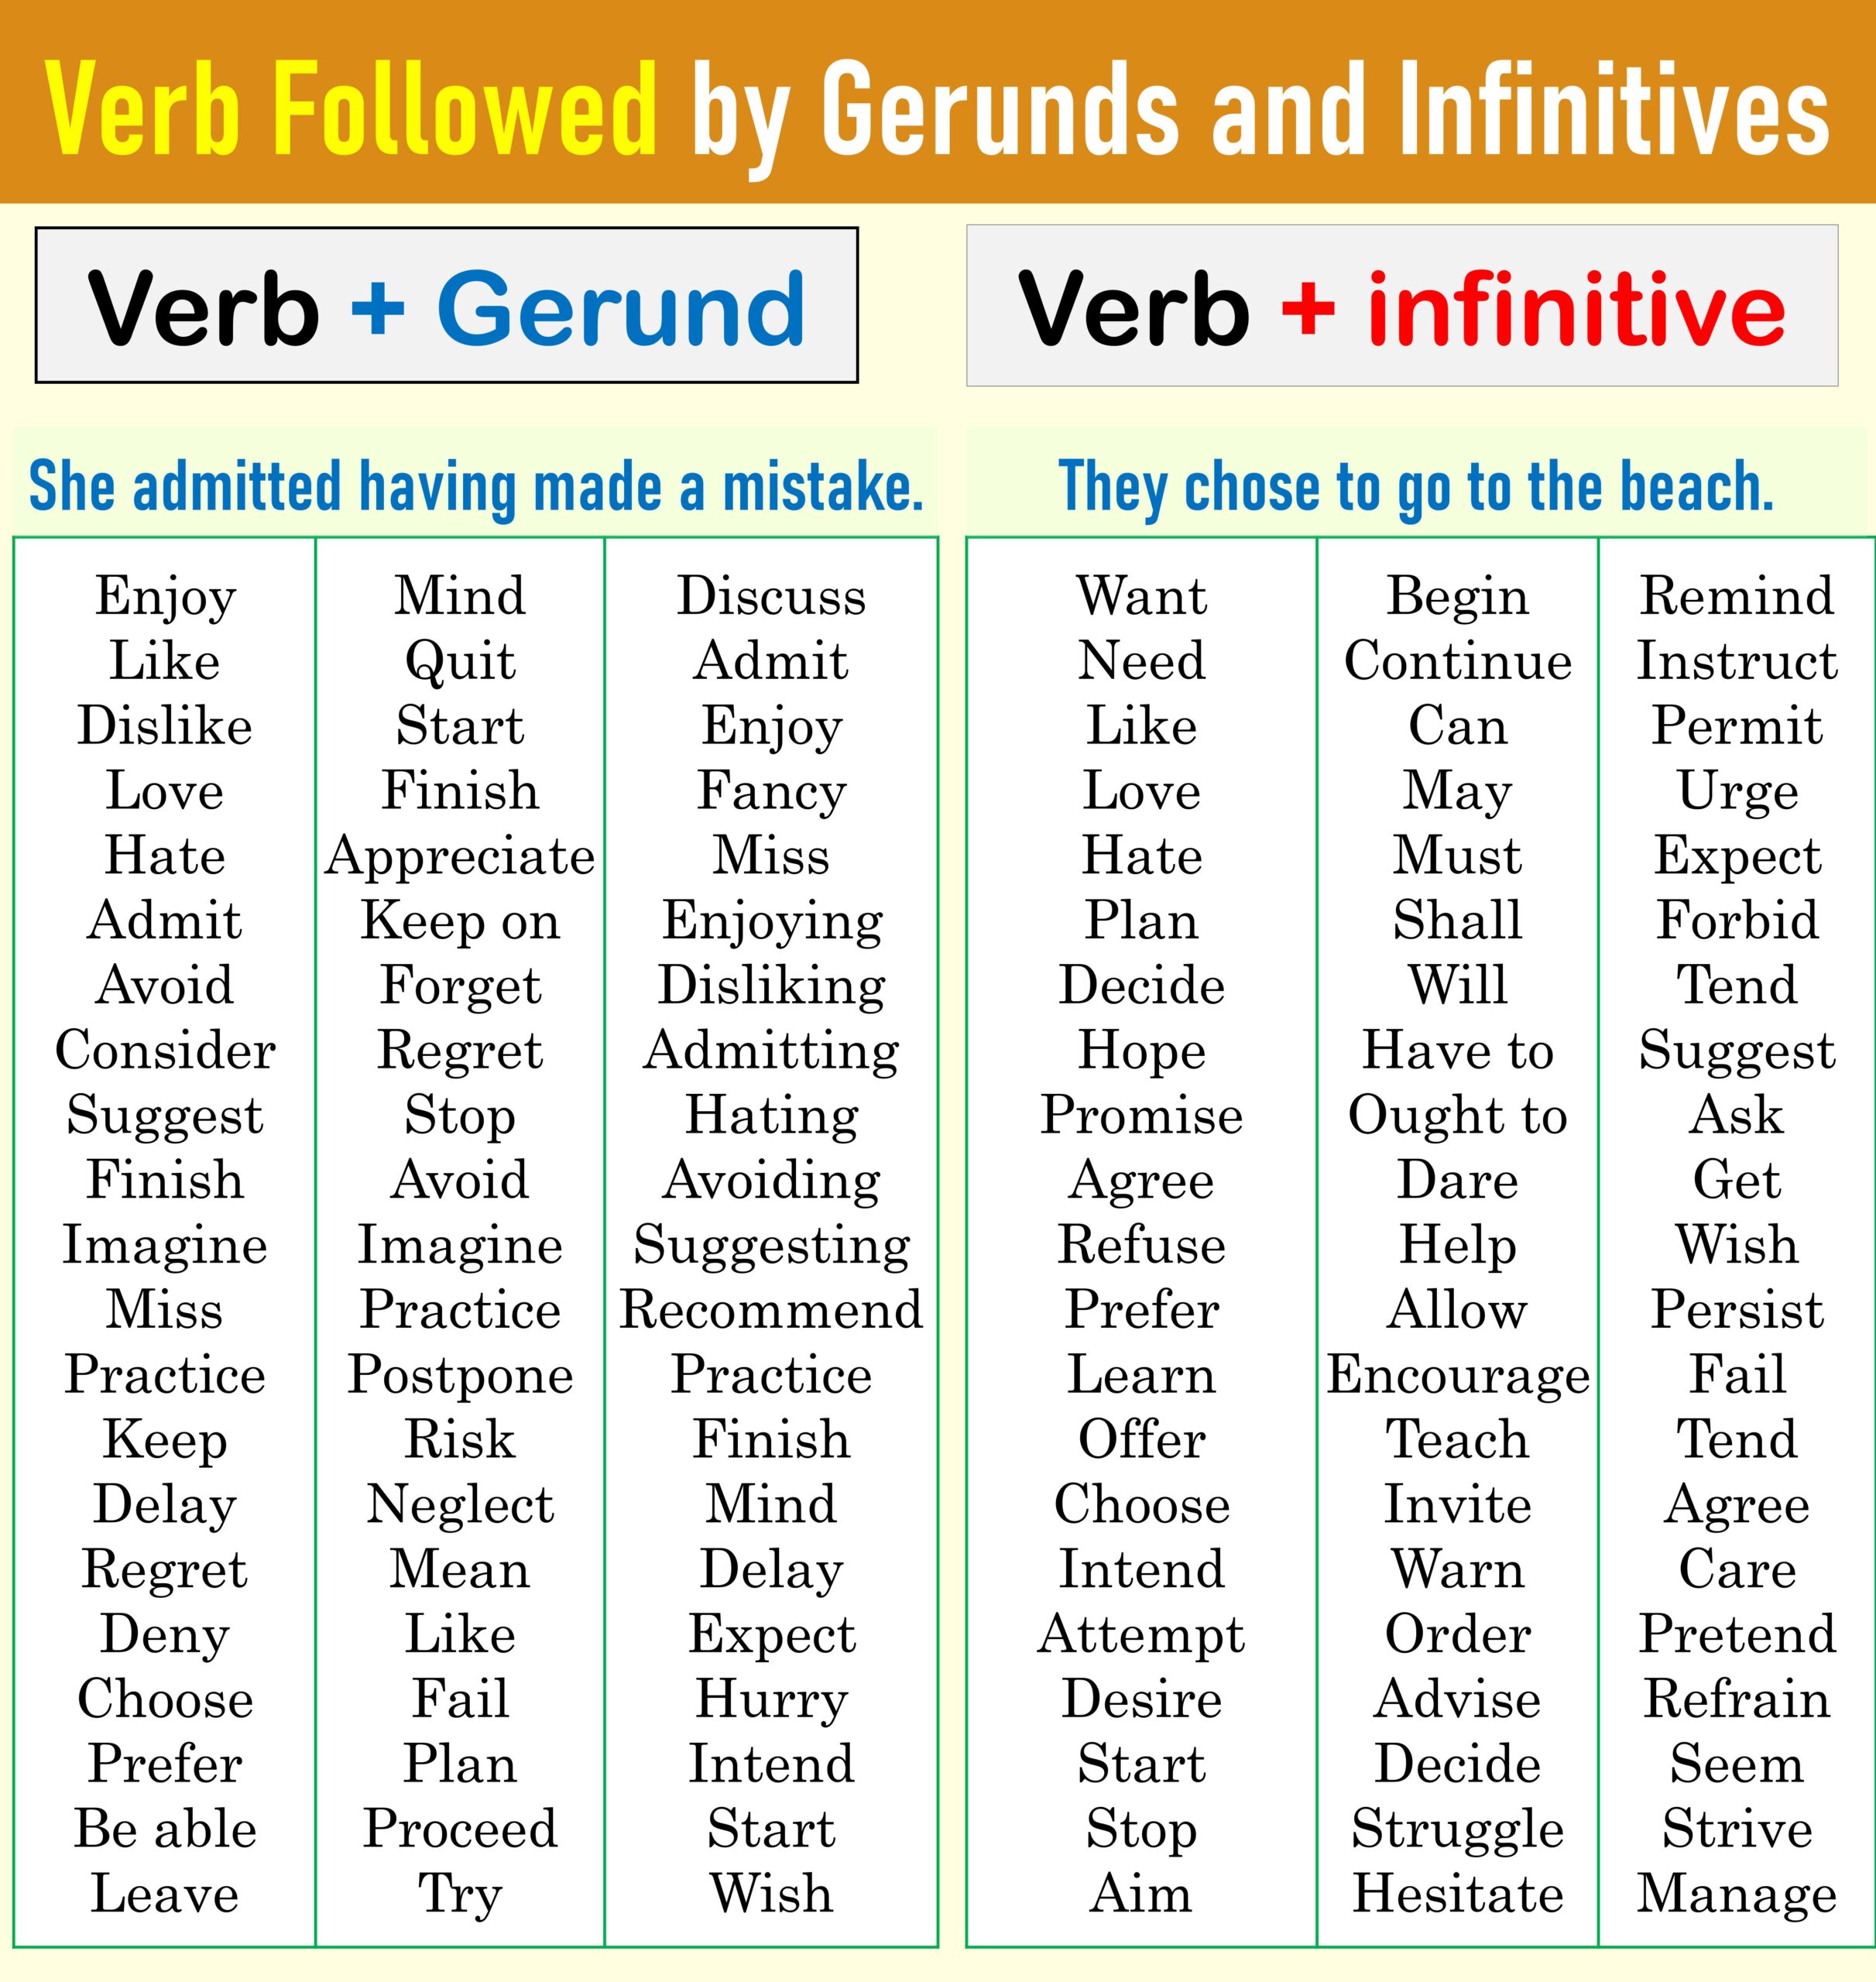 gerunds-and-infinitives-rules-in-english-easyenglishpath